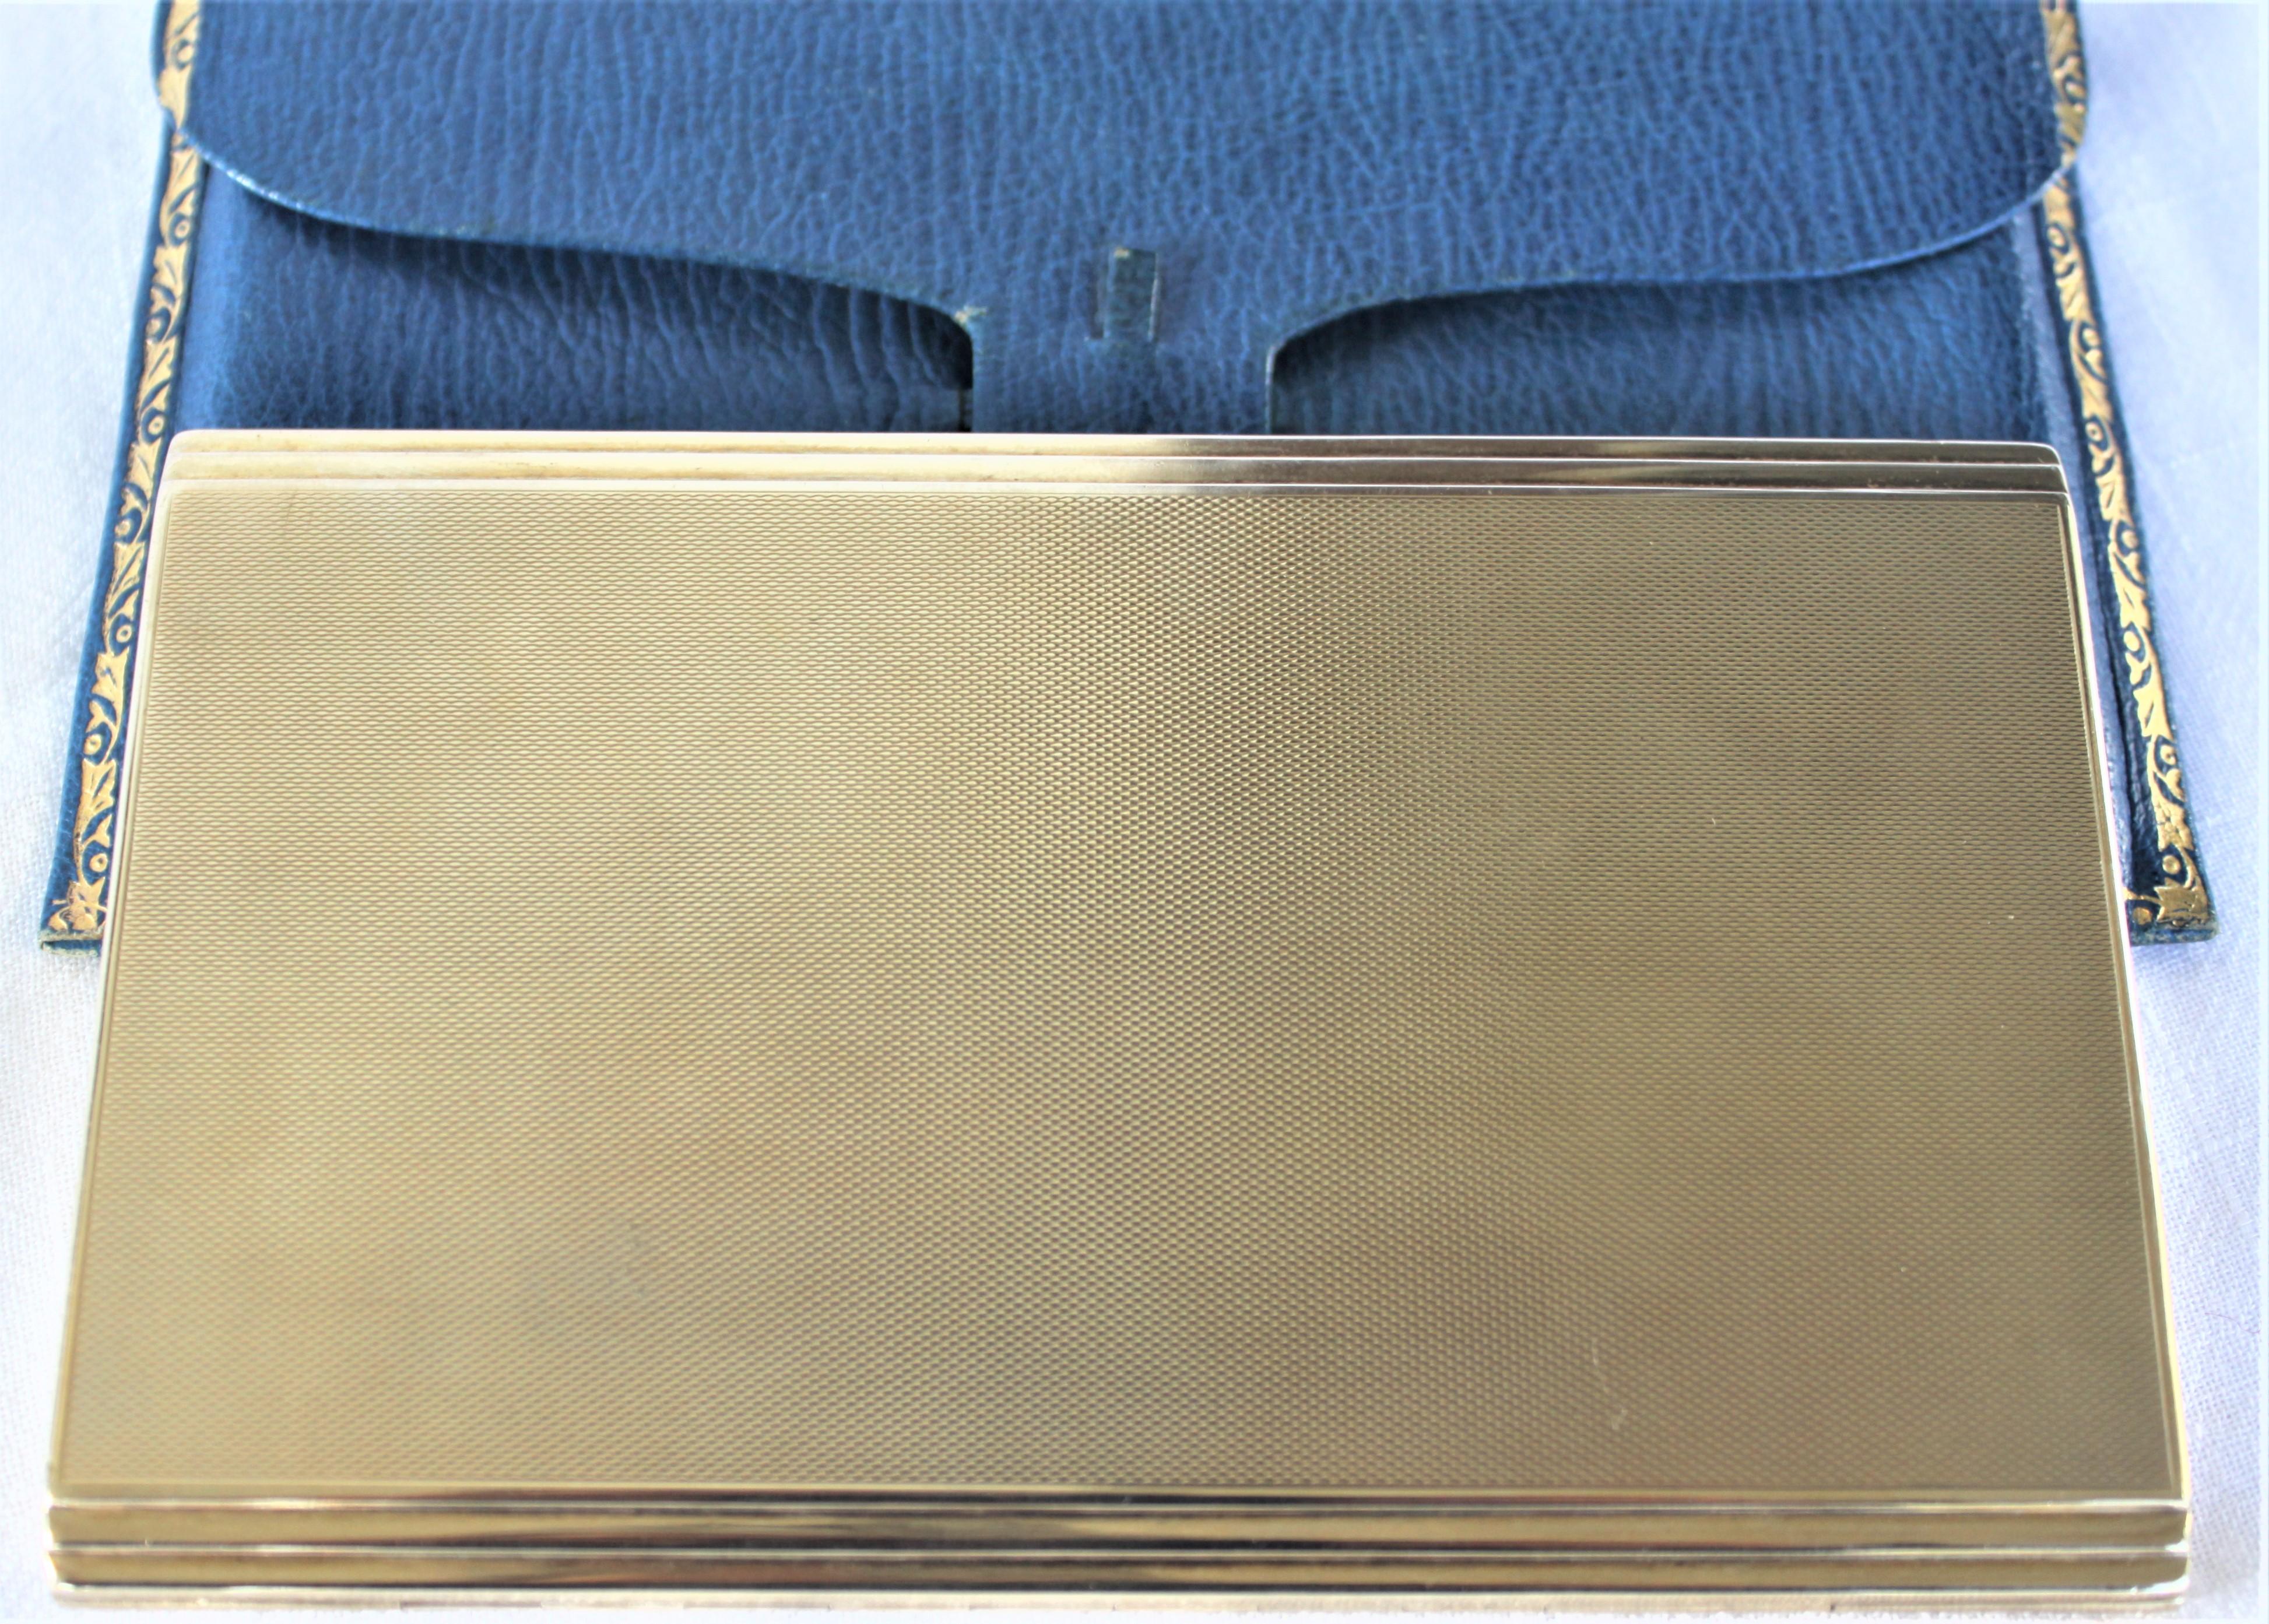 Birks Solid 9-Karat Yellow Gold Cigarette Case with Blue Outer Leather Envelope In Good Condition For Sale In Hamilton, Ontario